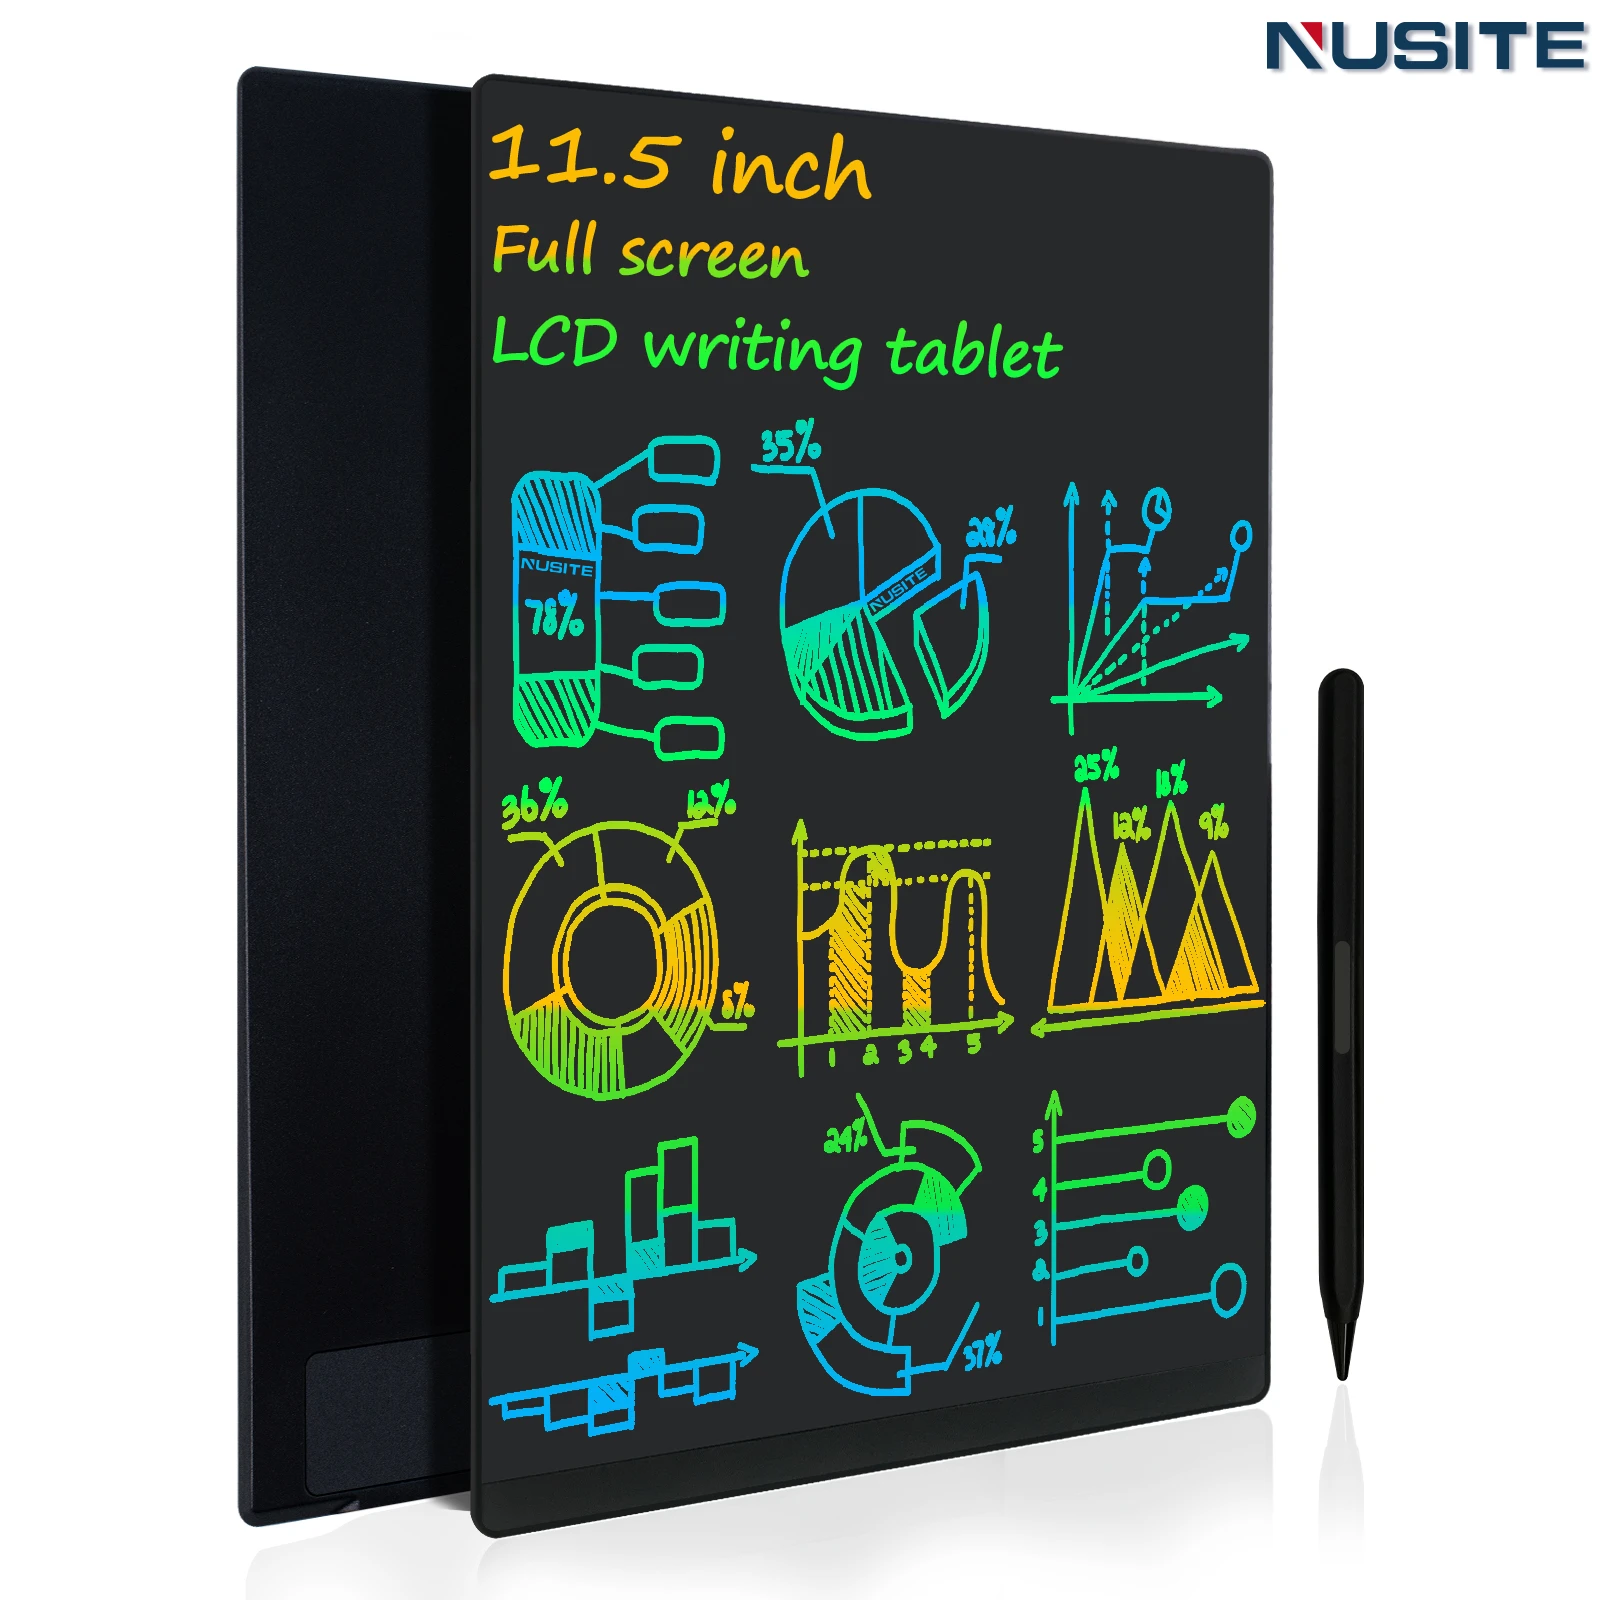 11.5 Inch Ultrathin Full Screen LCD Writing Tablet Built-in Magnets Innovative Graphic Drawing Pad Memo Boards for Work and Home